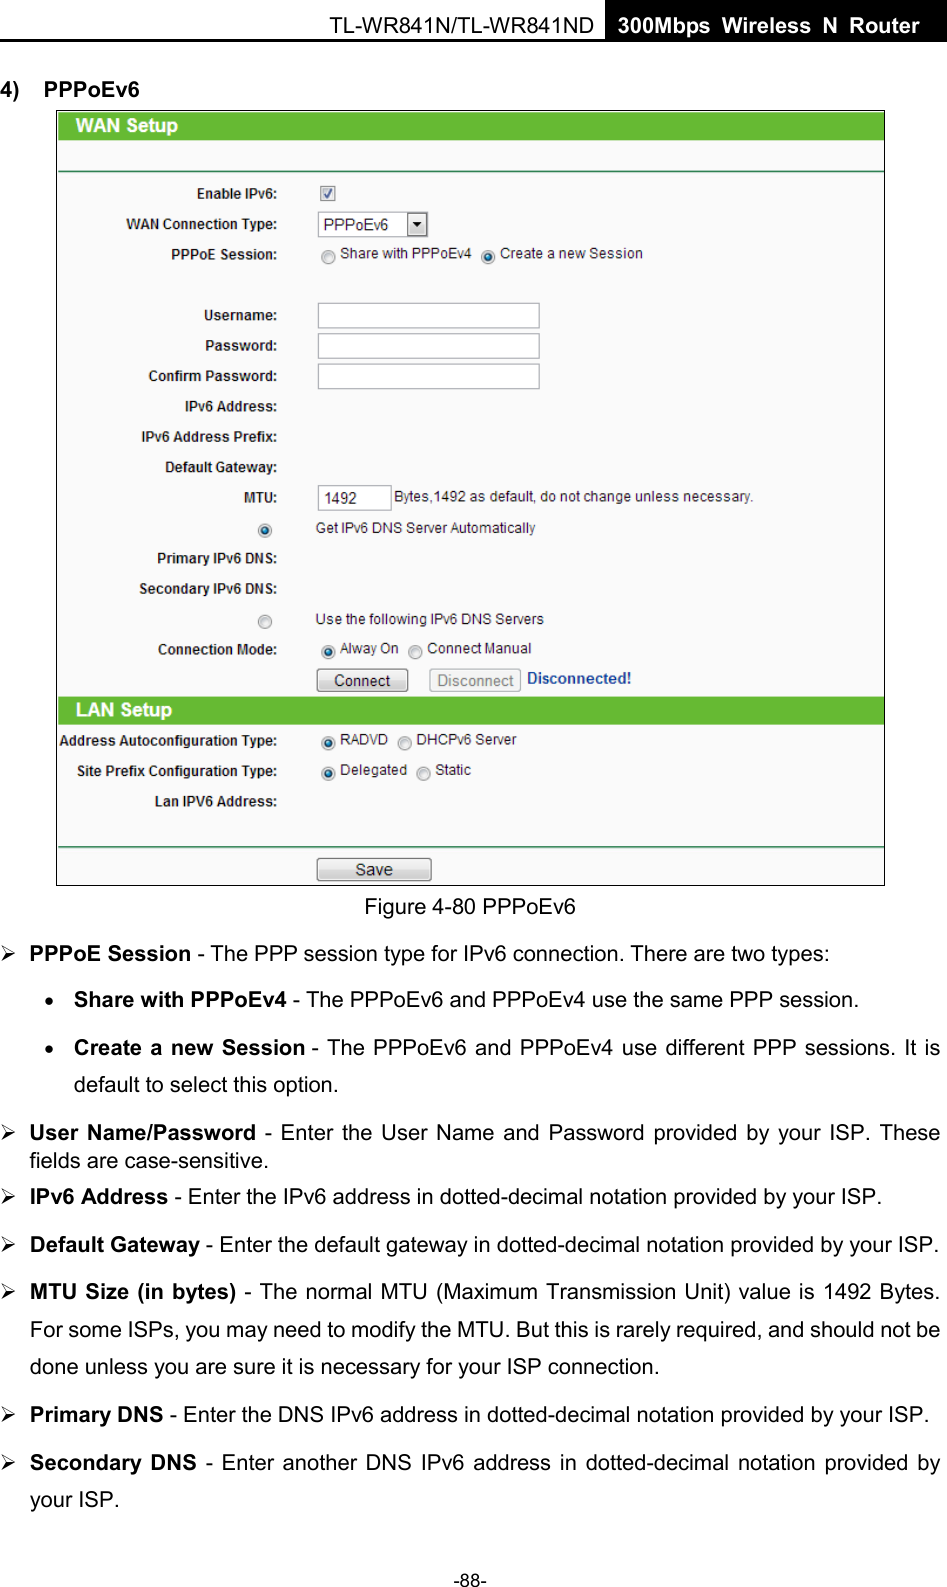  TL-WR841N/TL-WR841ND  300Mbps Wireless N Router    4) PPPoEv6  Figure 4-80 PPPoEv6  PPPoE Session - The PPP session type for IPv6 connection. There are two types: • Share with PPPoEv4 - The PPPoEv6 and PPPoEv4 use the same PPP session. • Create a new Session - The PPPoEv6 and PPPoEv4 use different PPP sessions. It is default to select this option.  User Name/Password -  Enter the User Name and Password provided by your ISP. These fields are case-sensitive.  IPv6 Address - Enter the IPv6 address in dotted-decimal notation provided by your ISP.  Default Gateway - Enter the default gateway in dotted-decimal notation provided by your ISP.  MTU Size (in bytes) - The normal MTU (Maximum Transmission Unit) value is 1492 Bytes. For some ISPs, you may need to modify the MTU. But this is rarely required, and should not be done unless you are sure it is necessary for your ISP connection.  Primary DNS - Enter the DNS IPv6 address in dotted-decimal notation provided by your ISP.  Secondary DNS  - Enter another DNS IPv6 address in dotted-decimal notation provided by your ISP. -88- 